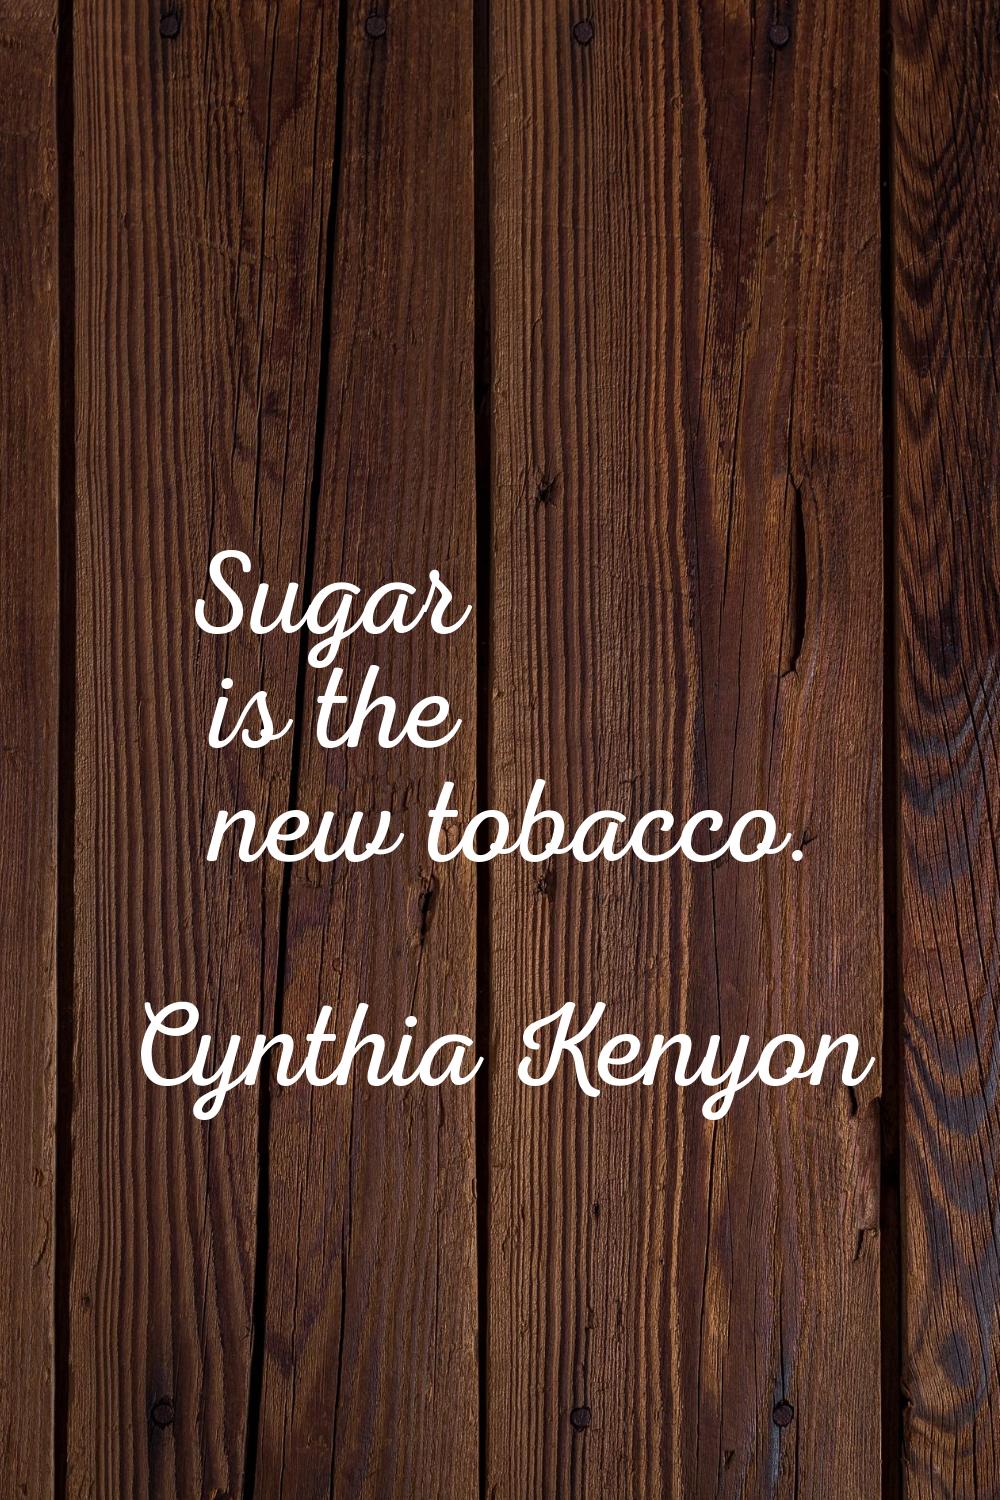 Sugar is the new tobacco.